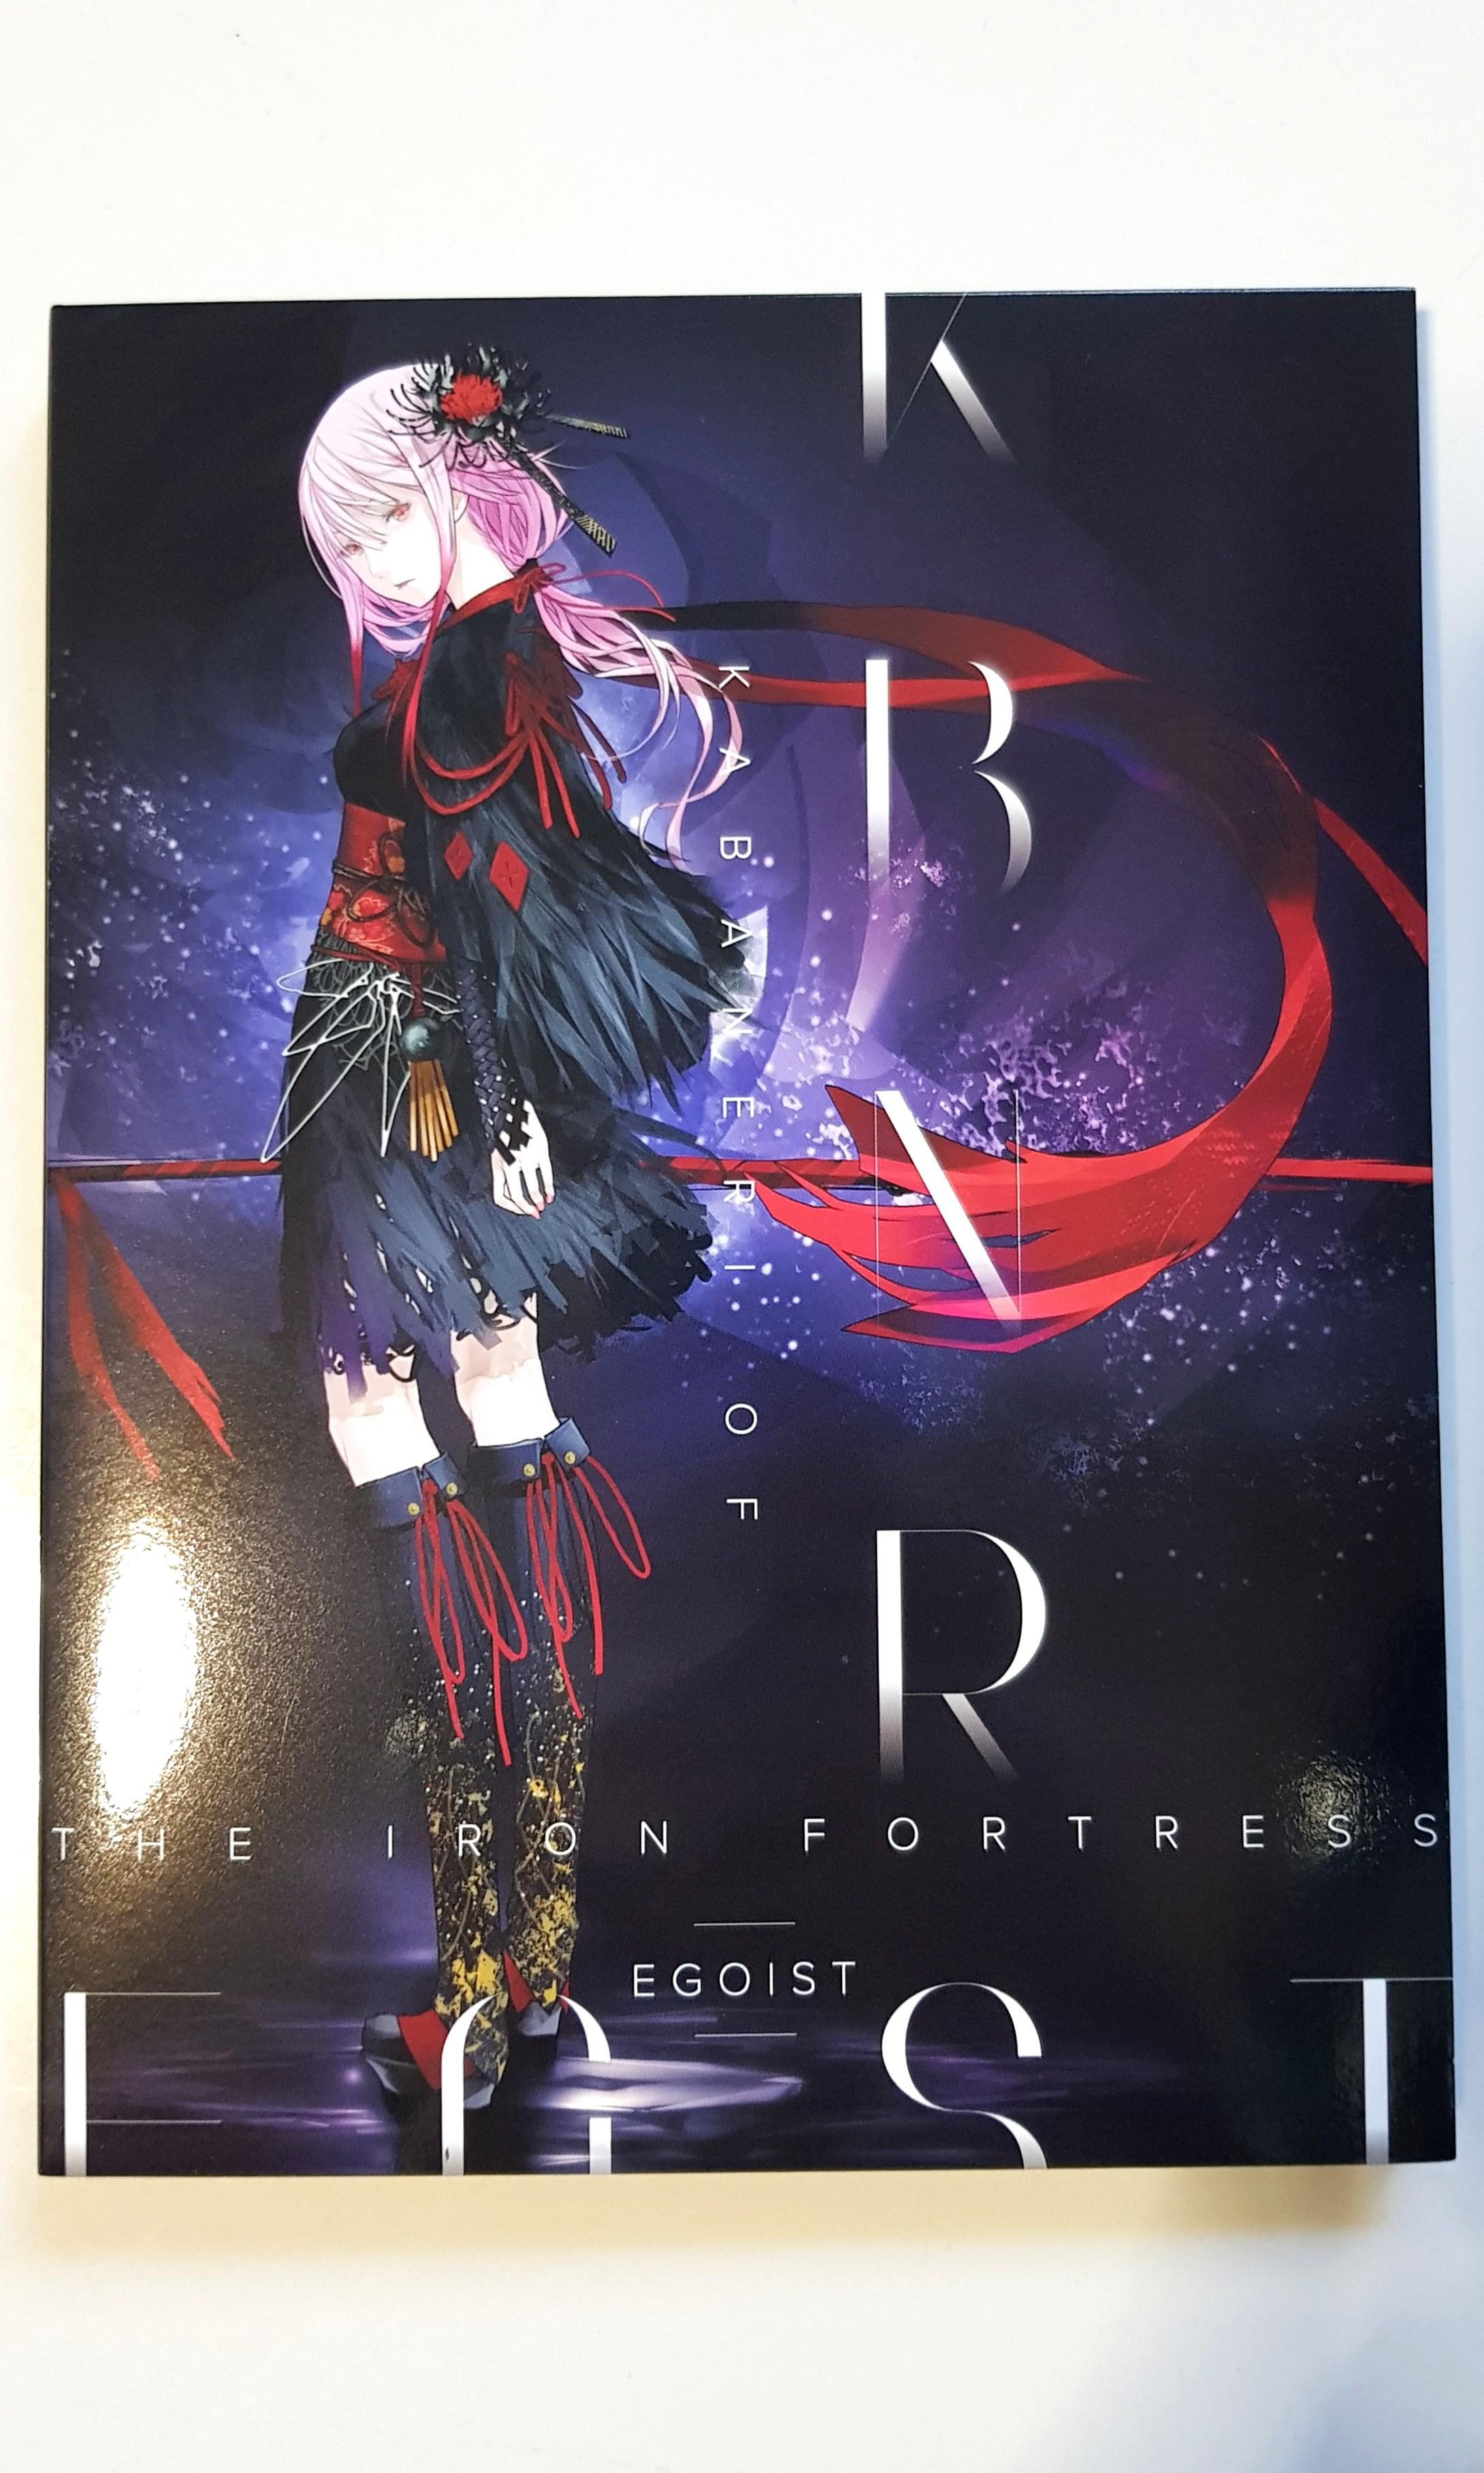 Egoist Kabaneri Of The Iron Fortress Limited Edition Entertainment J Pop On Carousell